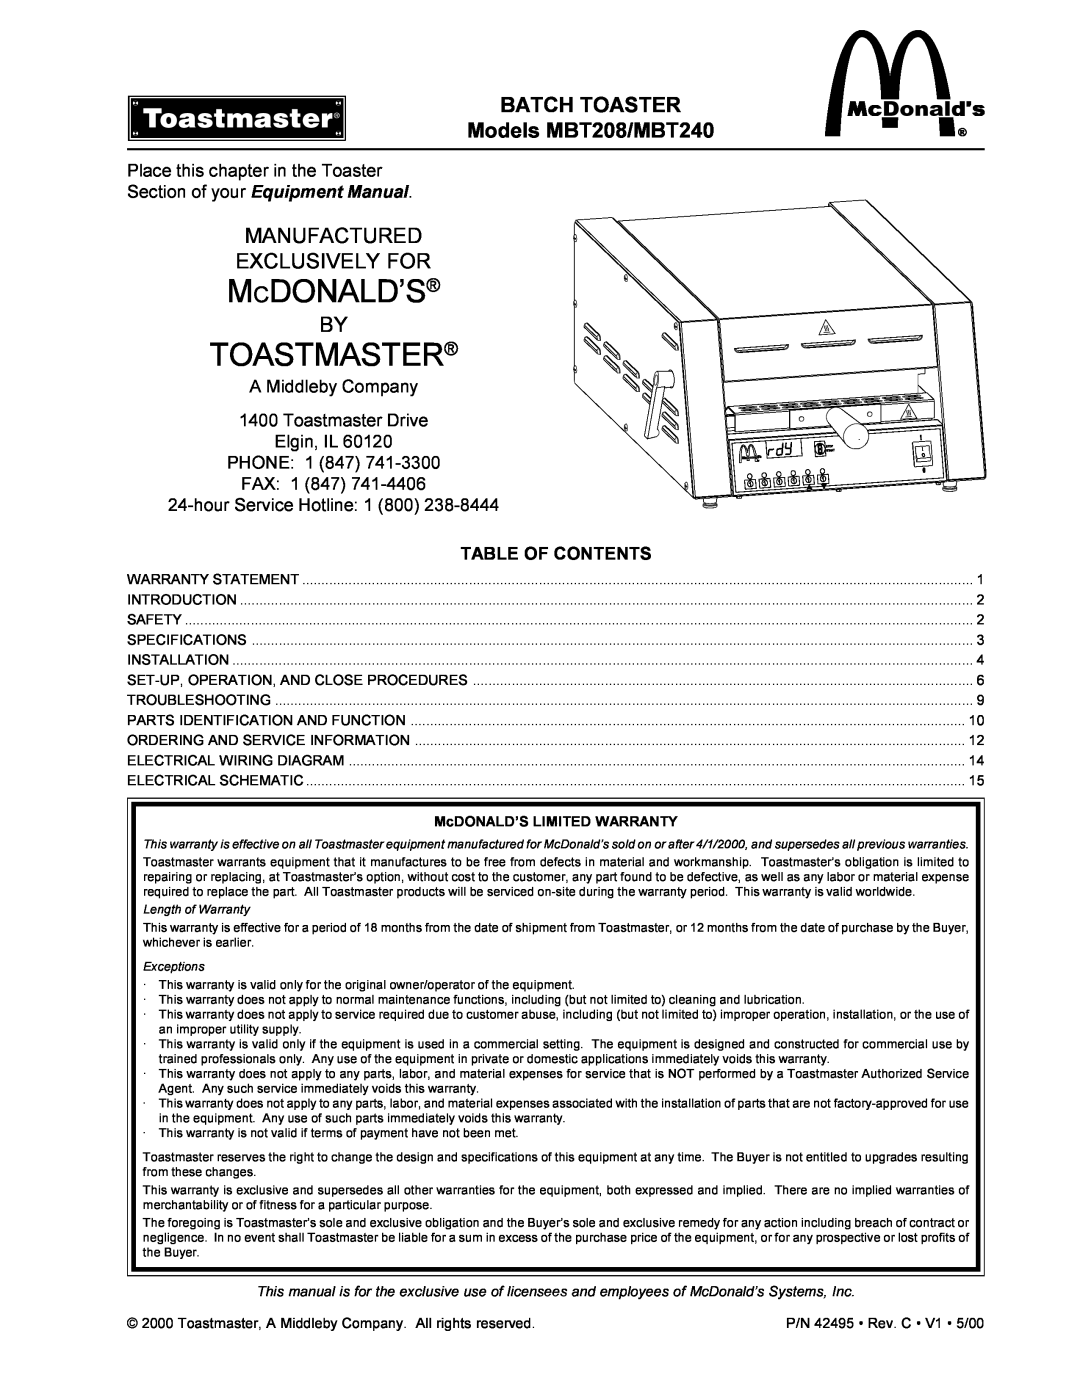 Toastmaster warranty Batch Toaster, Models MBT208/MBT240, Table Of Contents, Mcdonald’S, Toastmaster, Manufactured 